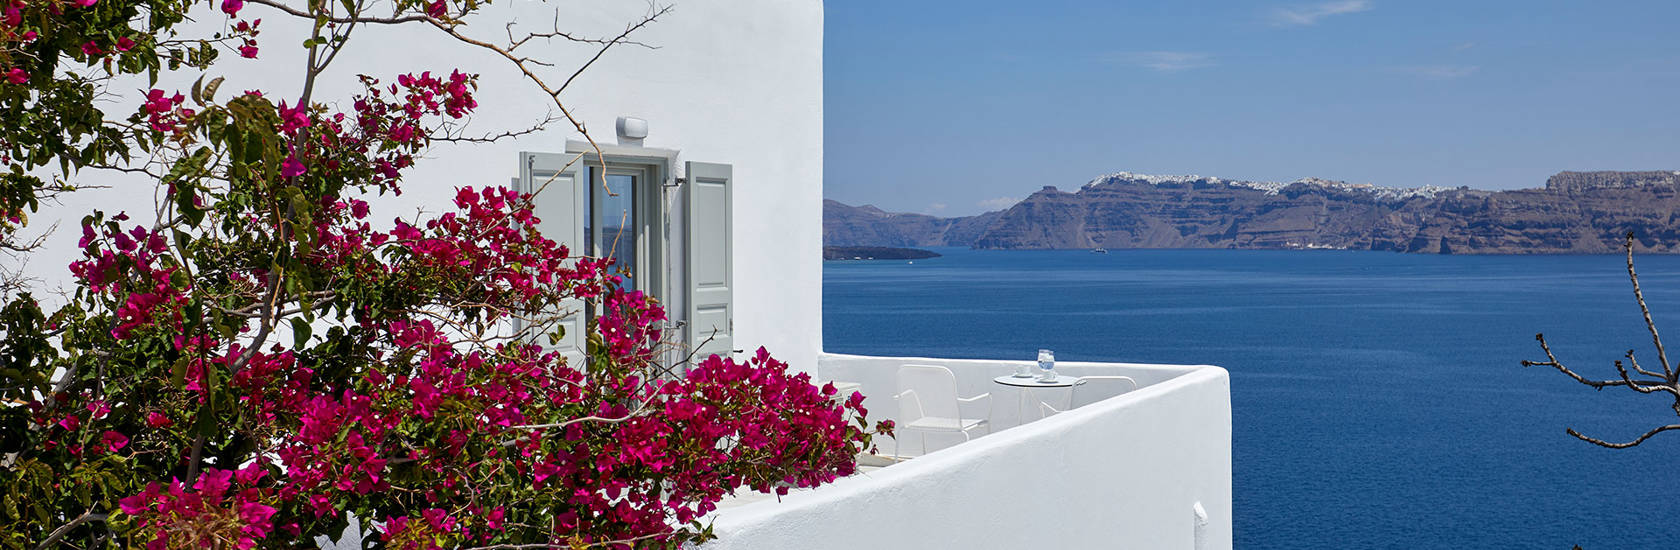 
Santorini View Hotel room with caldera sea view and white balcony with fuchsia bougainvillea undeer the blue sky